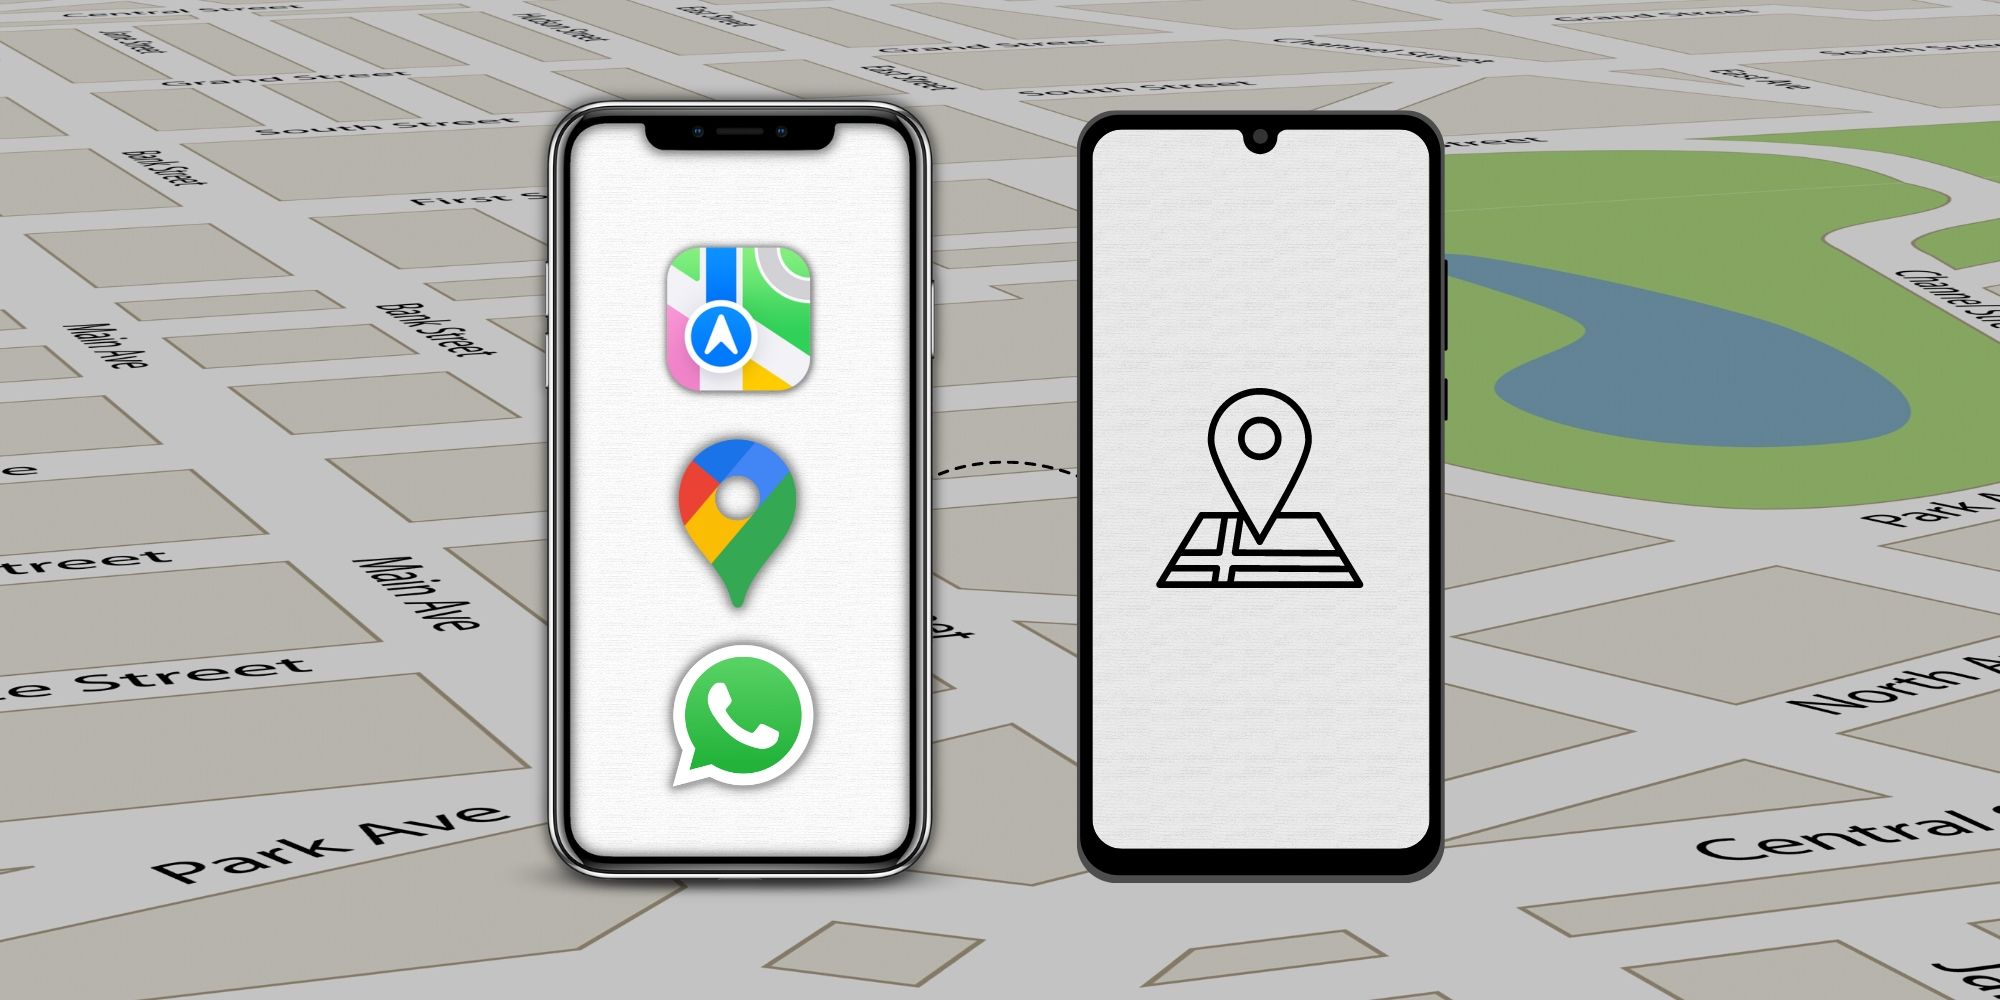 How to Share Your Location via WhatsApp: iPhone & Android